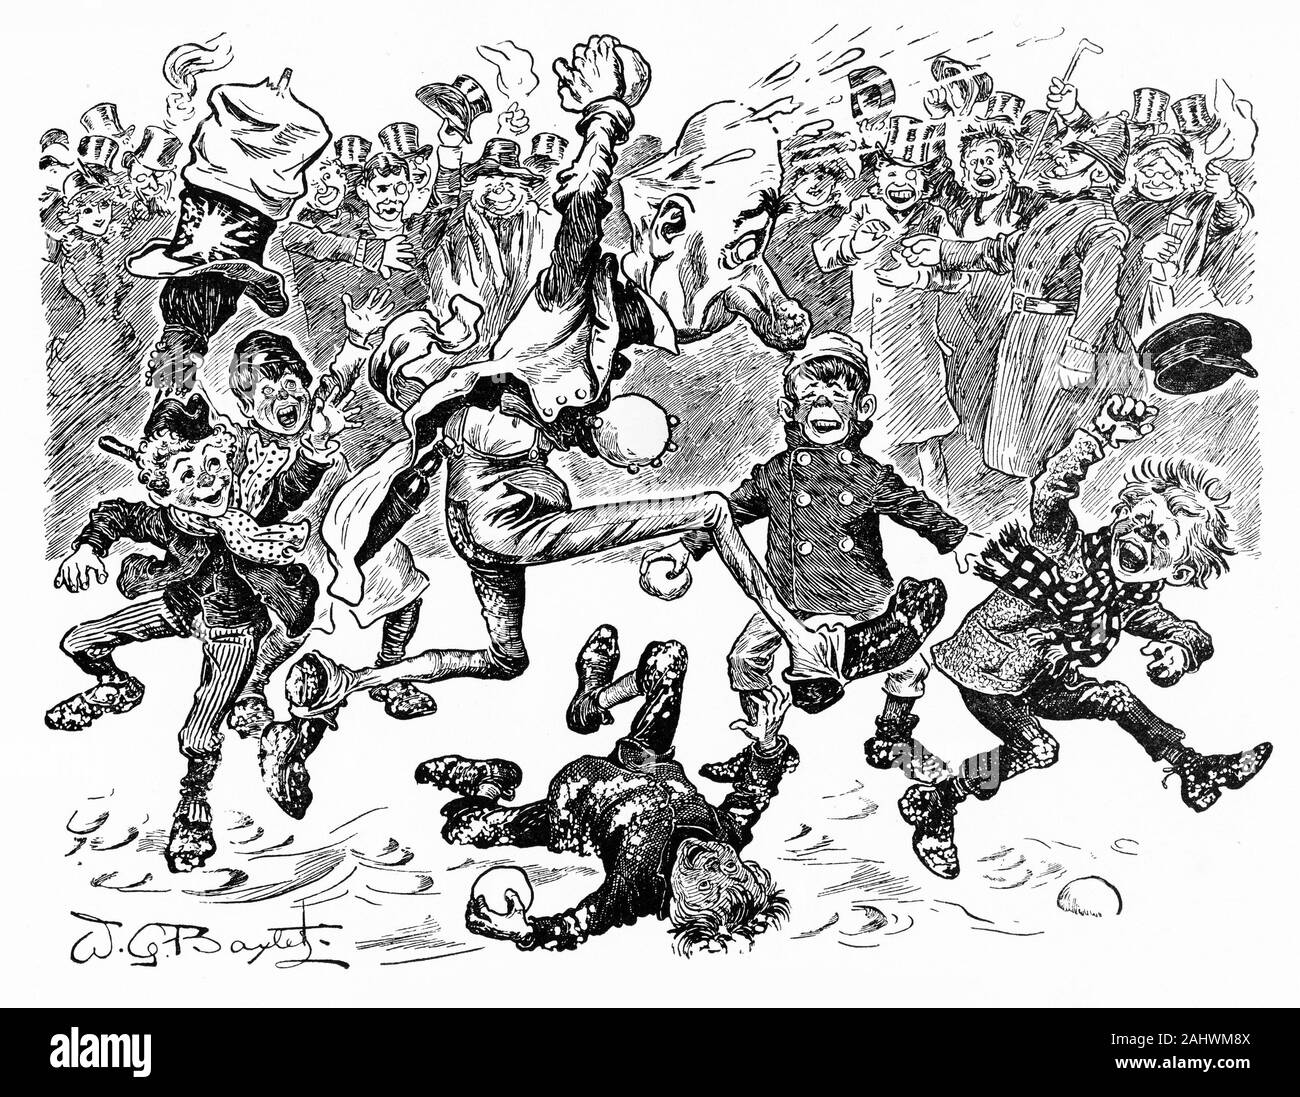 Engraving of a crowd of people in London enjoying a snowball fight involving a crowd of boys and their elderly victim. Stock Photo